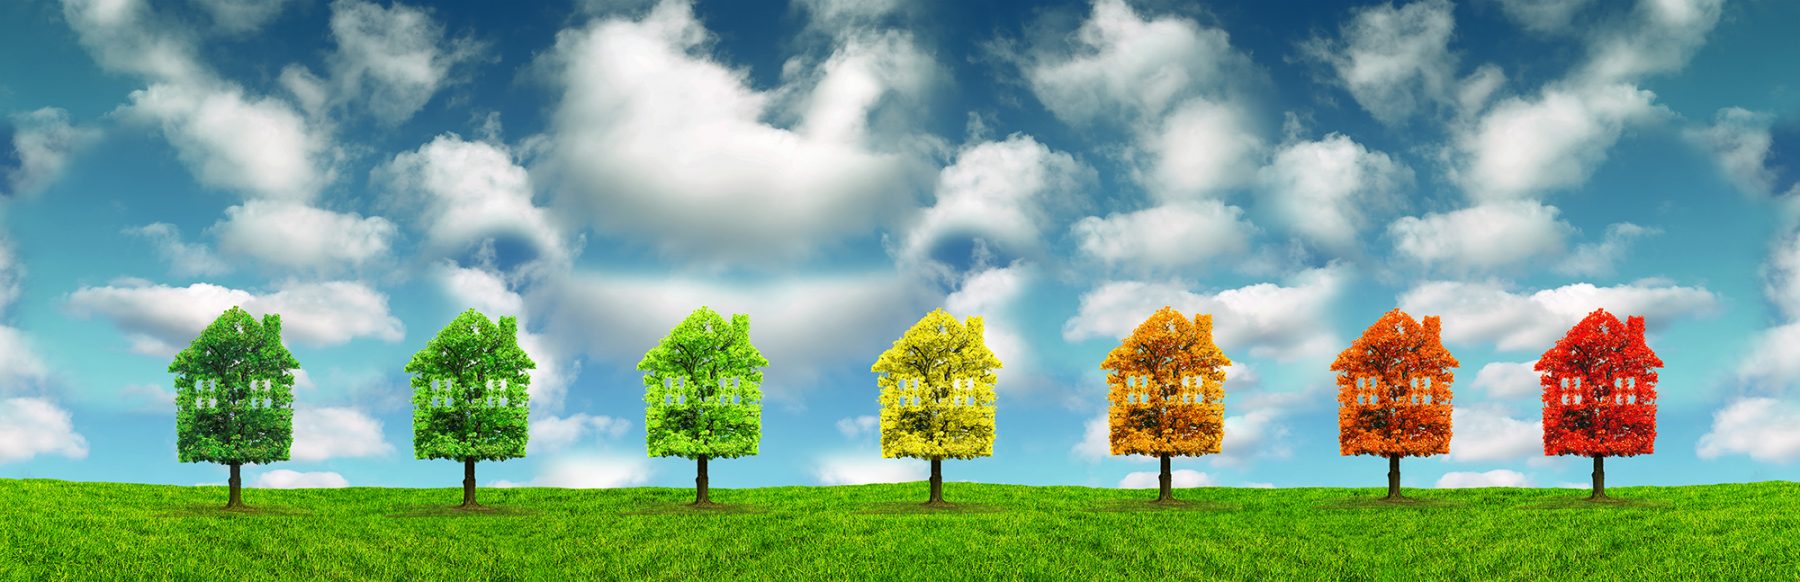 A row of trees in various colors representing different seasons against a blue sky with fluffy clouds.